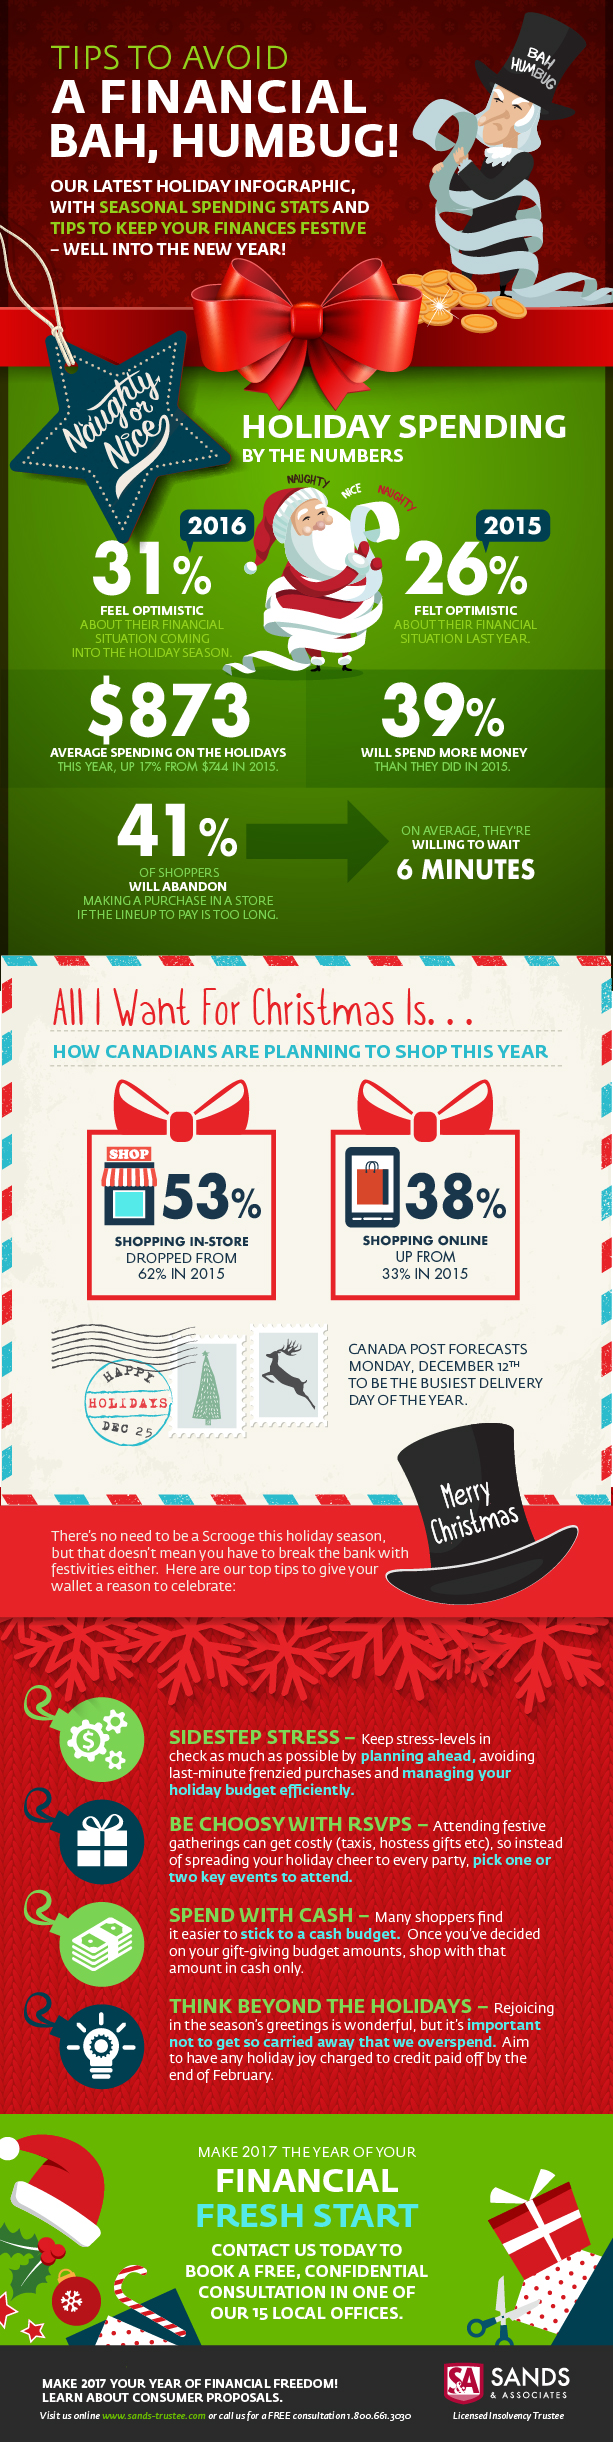 Sands & Associates - Holiday Spending Tips Infographic 2016